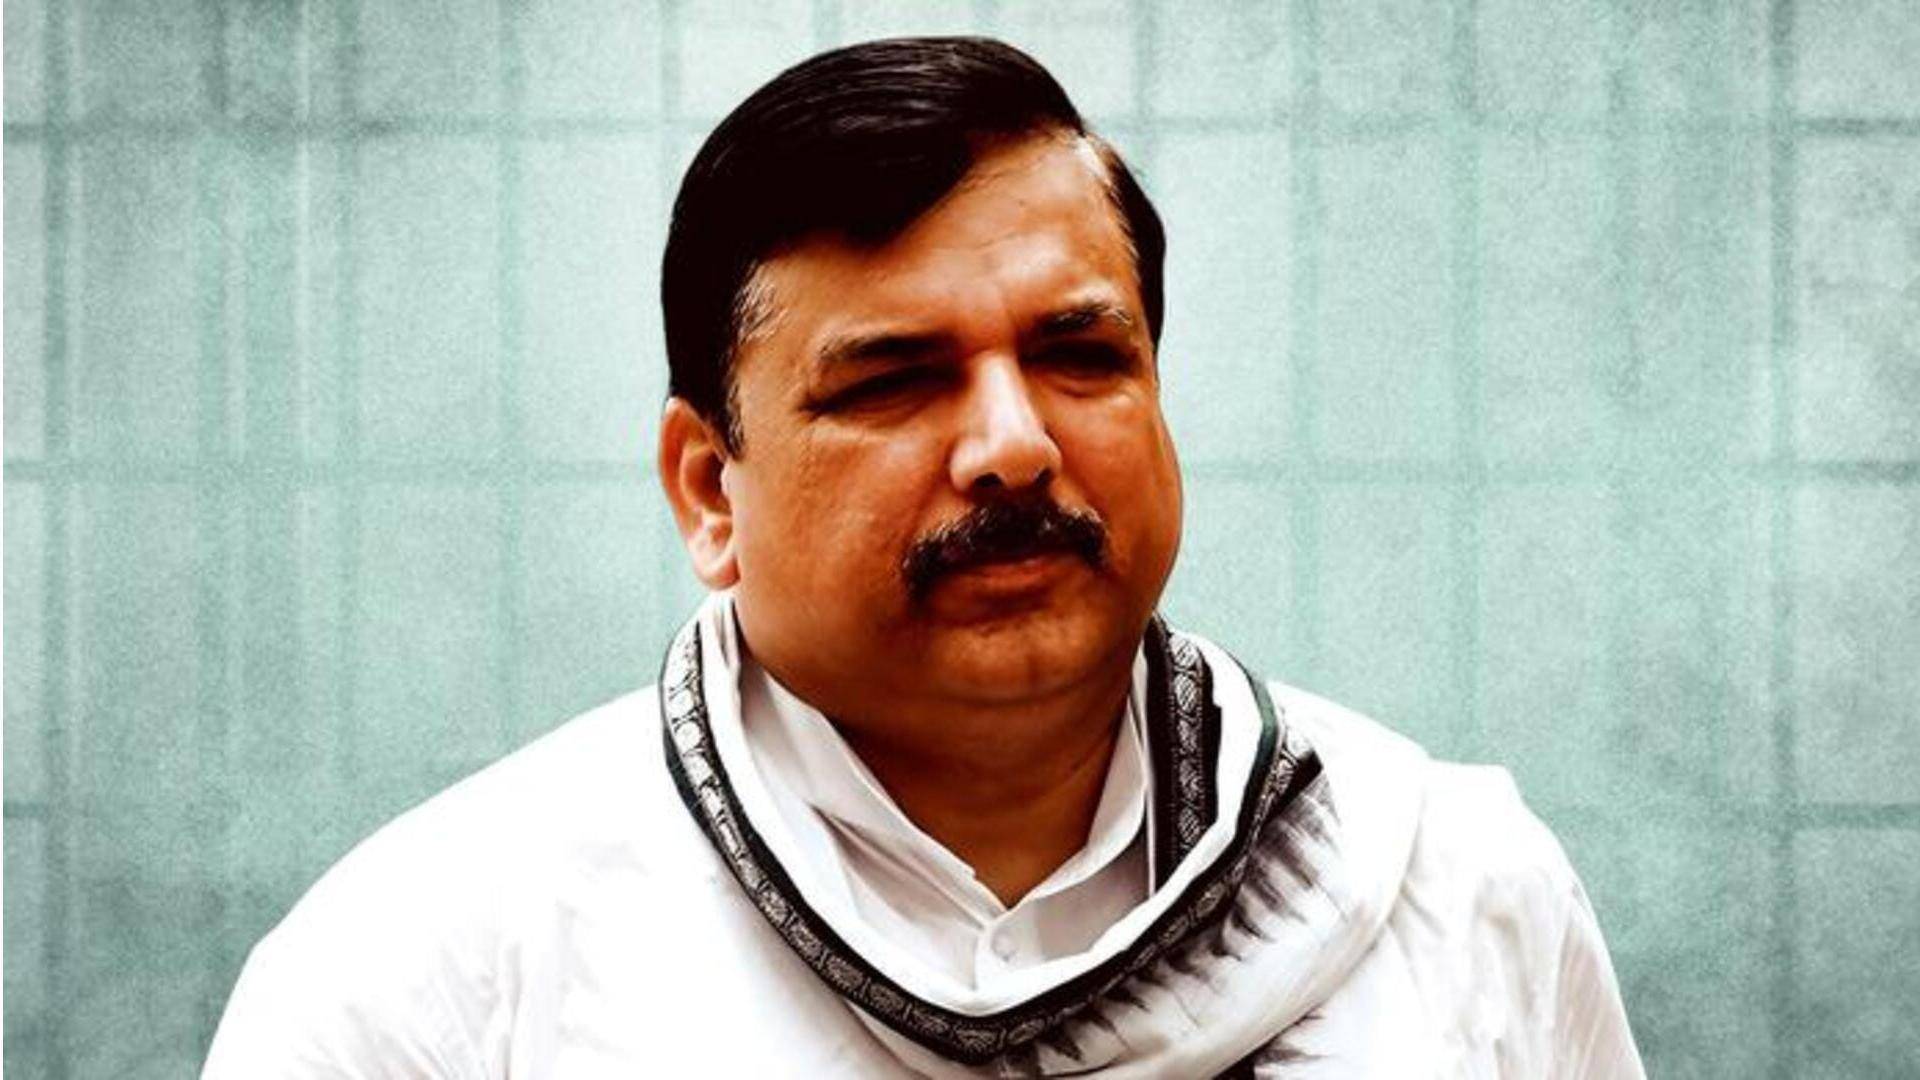 Chargesheet filed against Sanjay Singh in Delhi liquor scam case